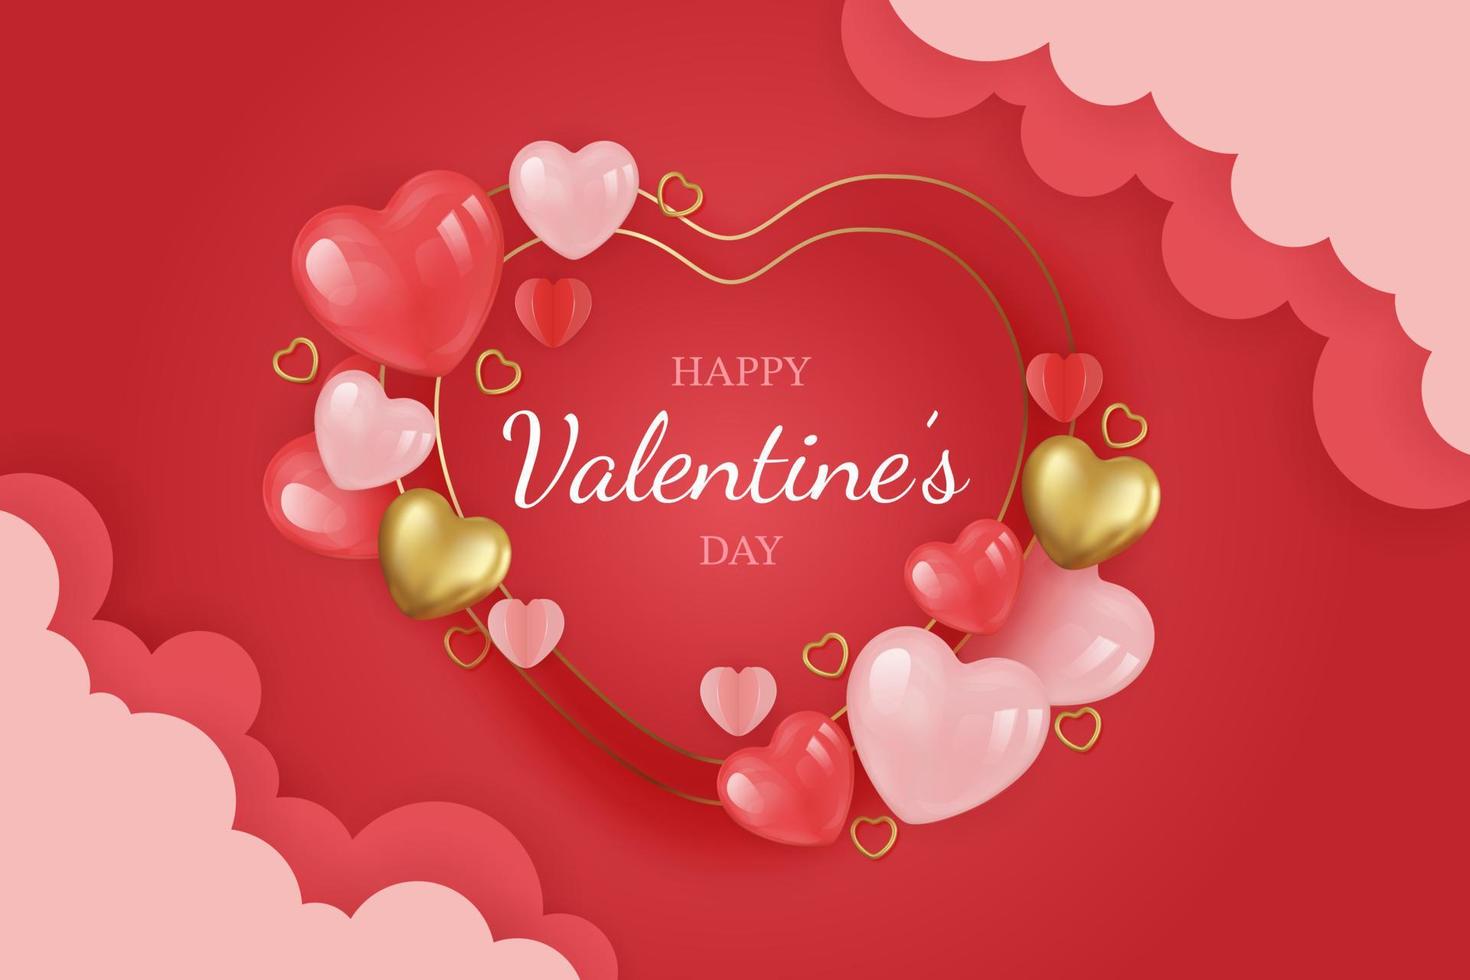 Valentine's day background with balloons heart and golden hearts. Vector illustration. Wallpaper, flyers, invitation, posters, brochure, banners.